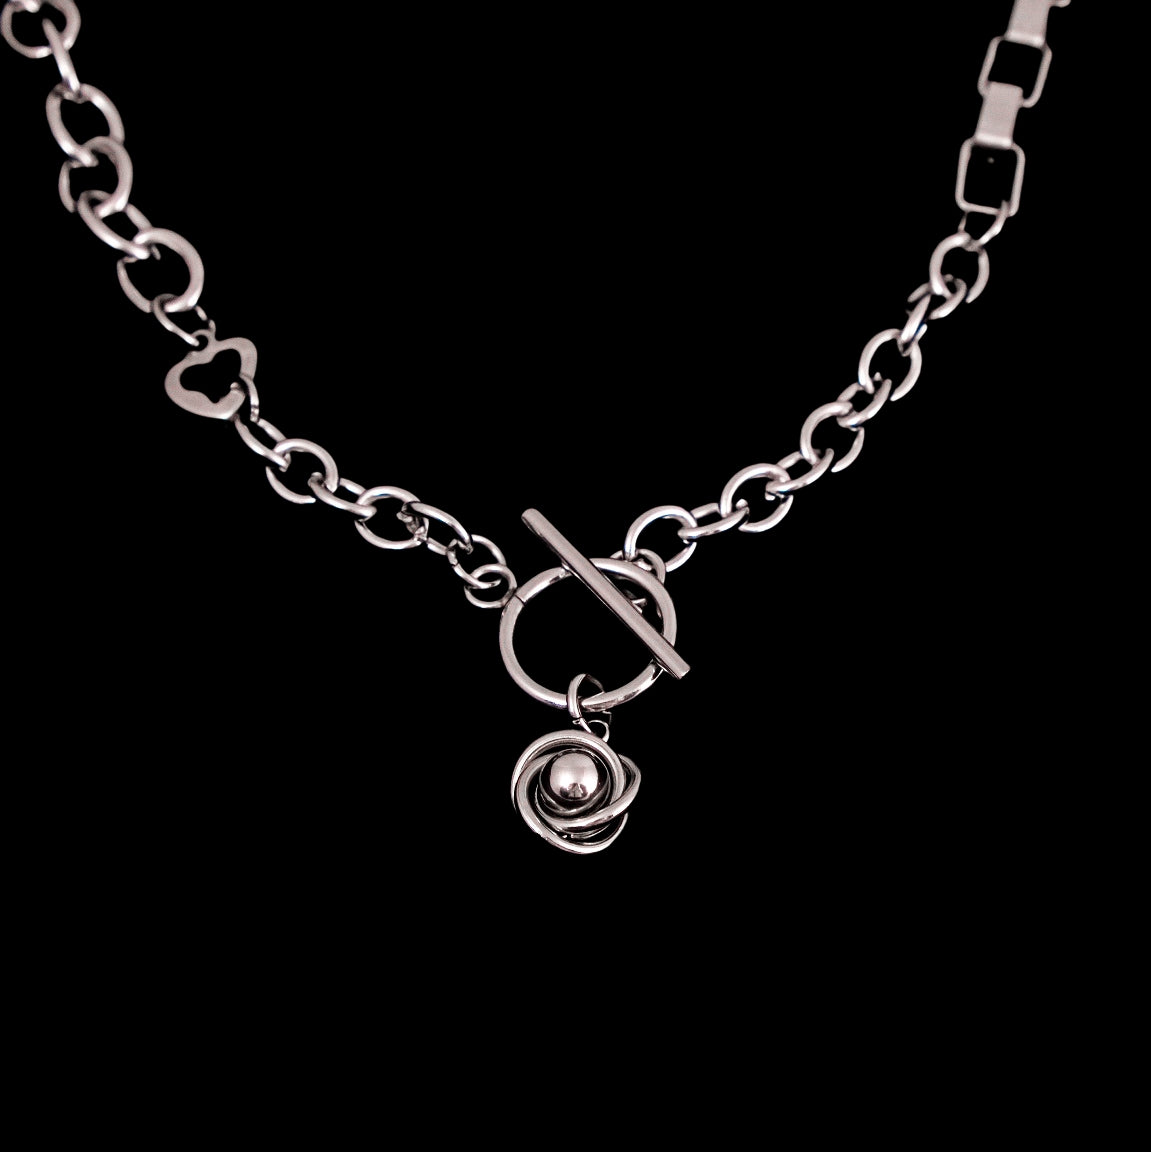 Circling Rose Necklace